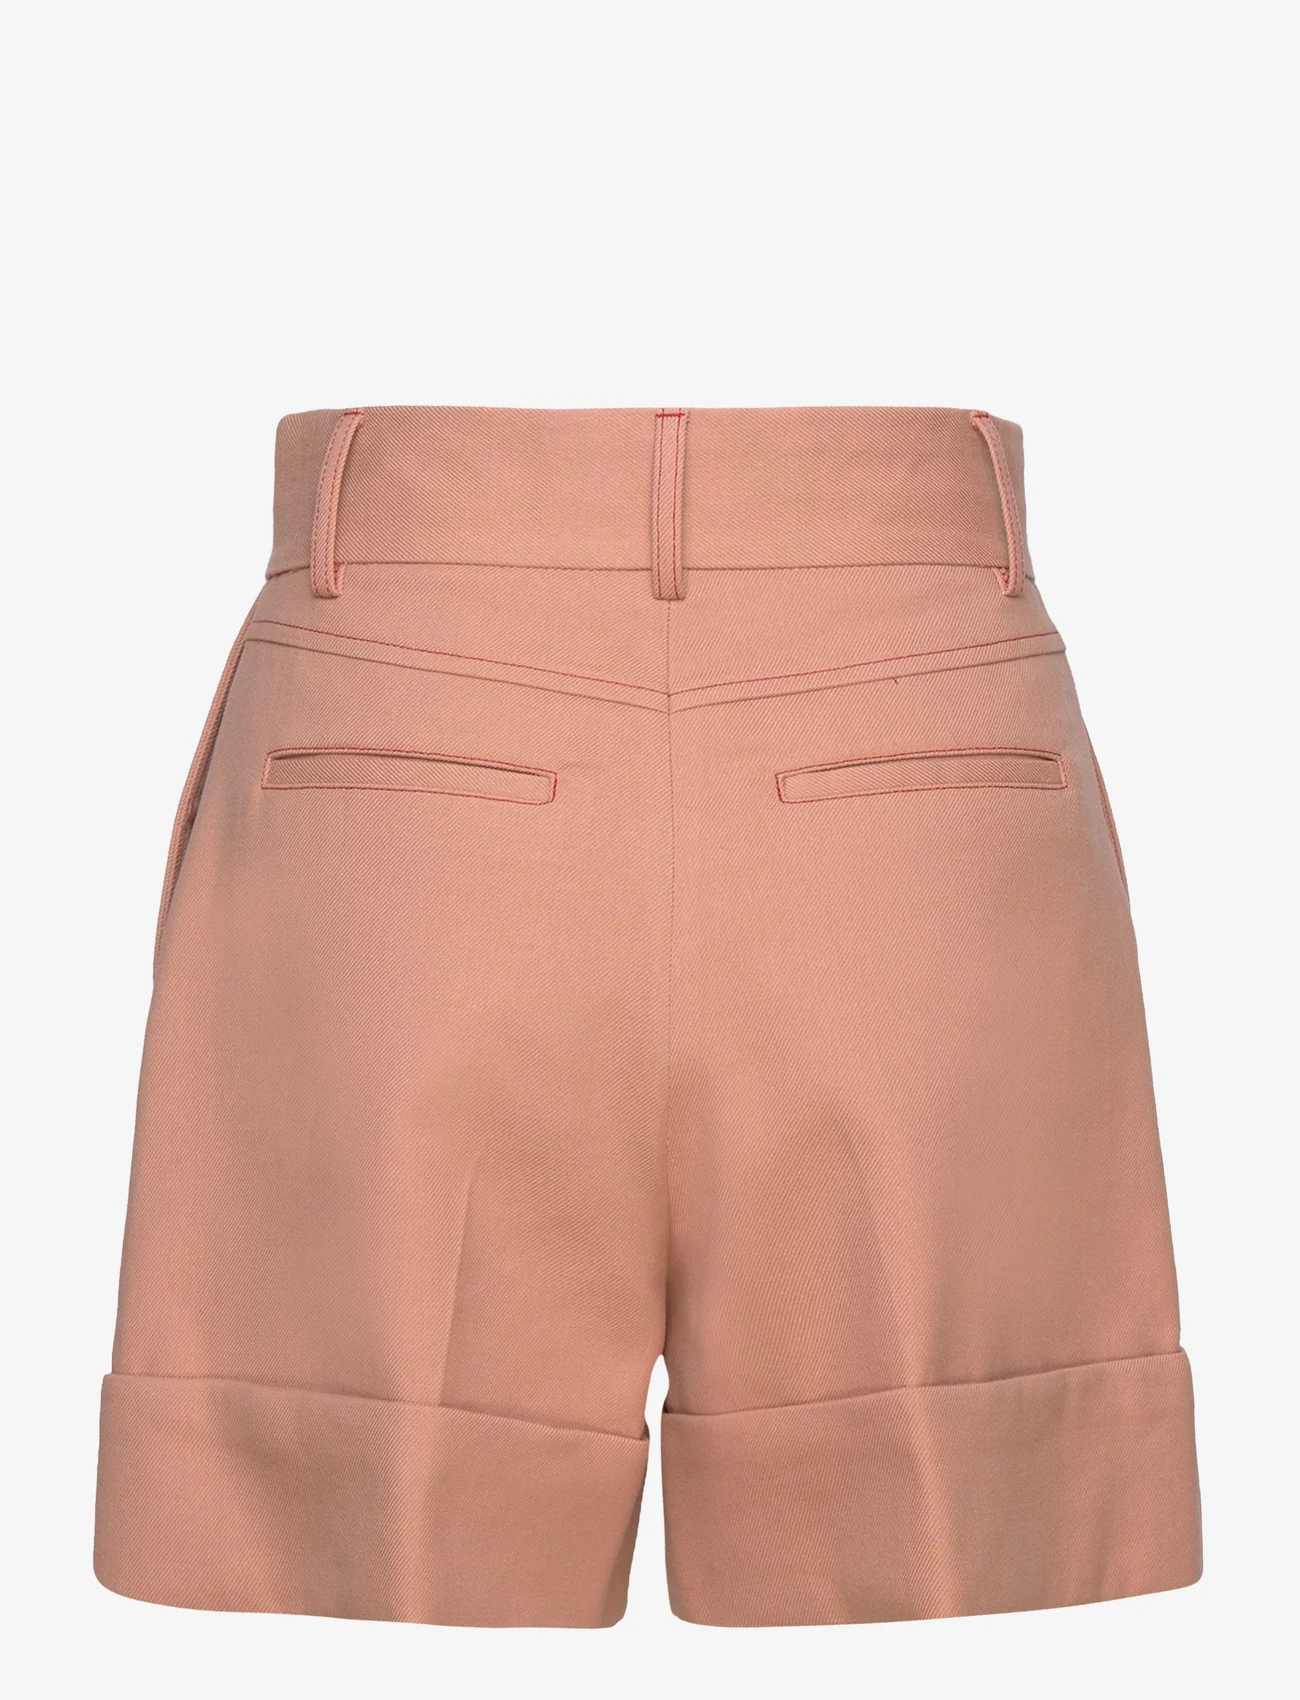 See by Chloé - Short - dusty coral - 1